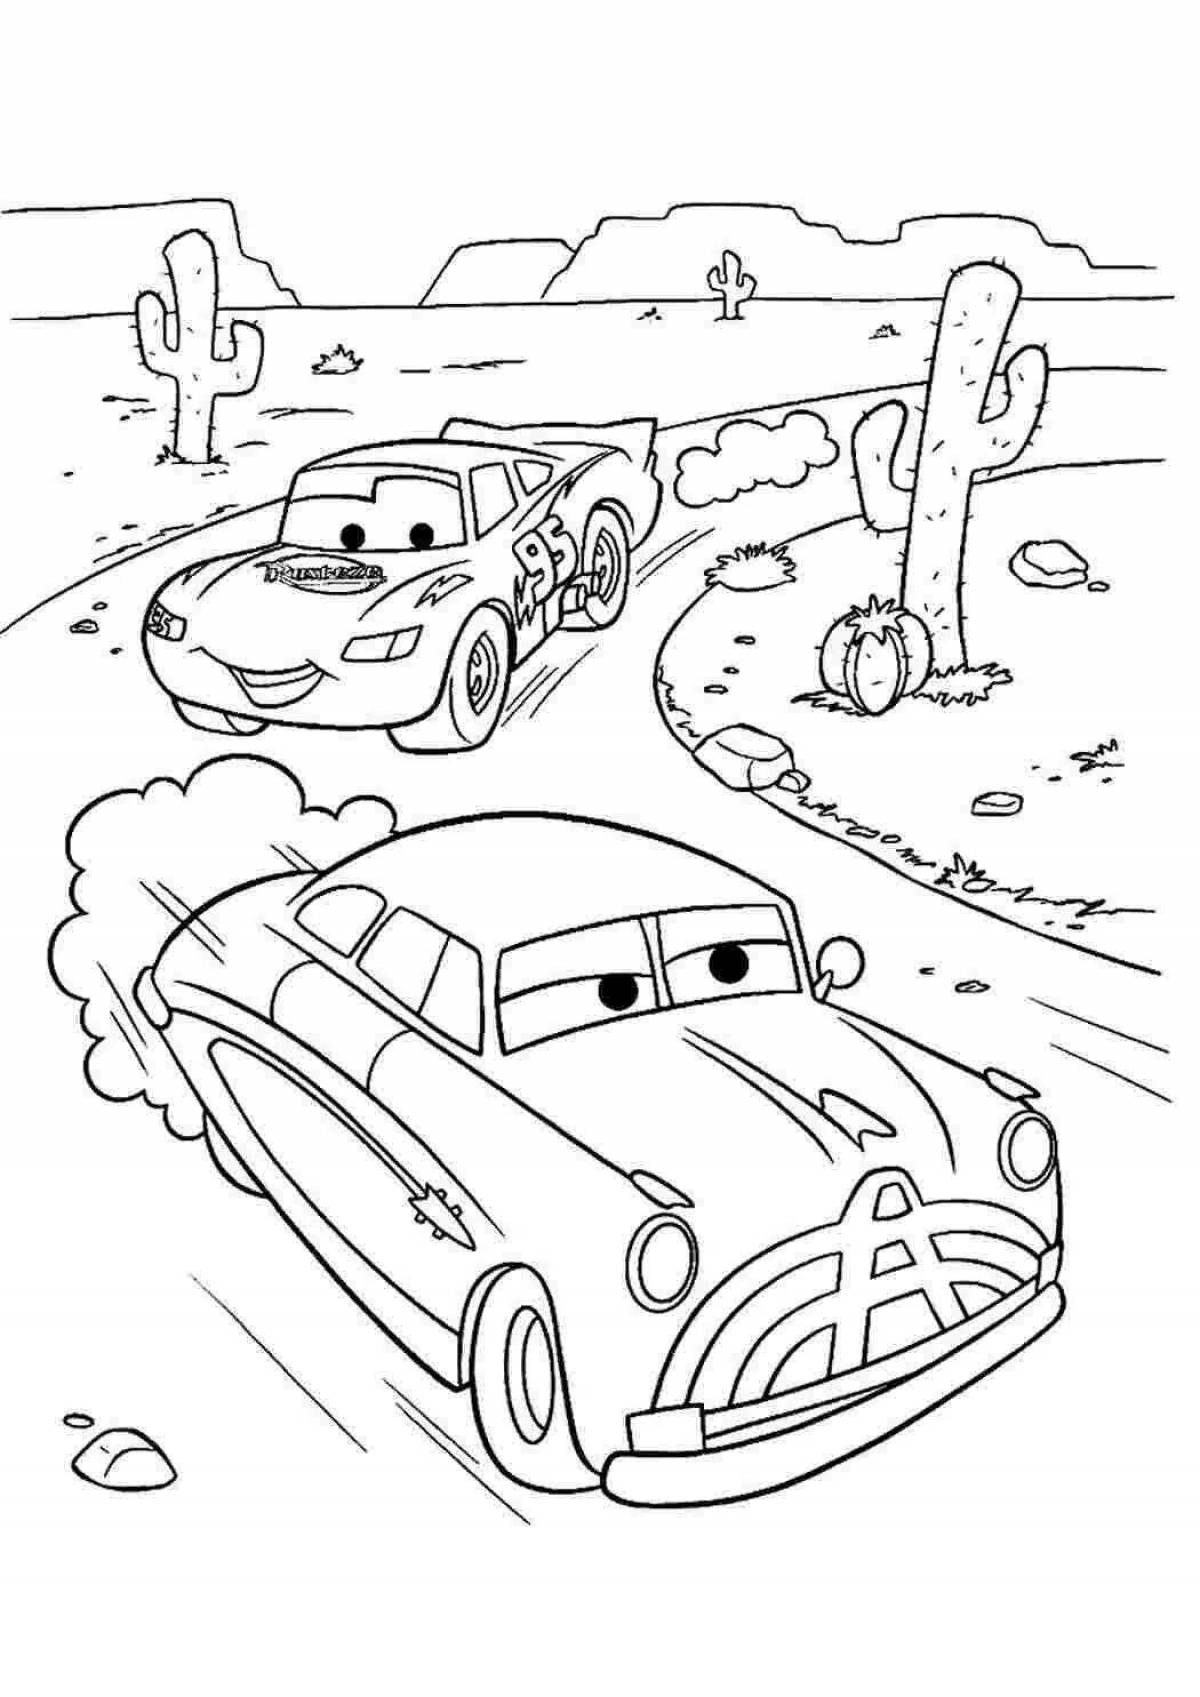 Adorable car coloring book for kids